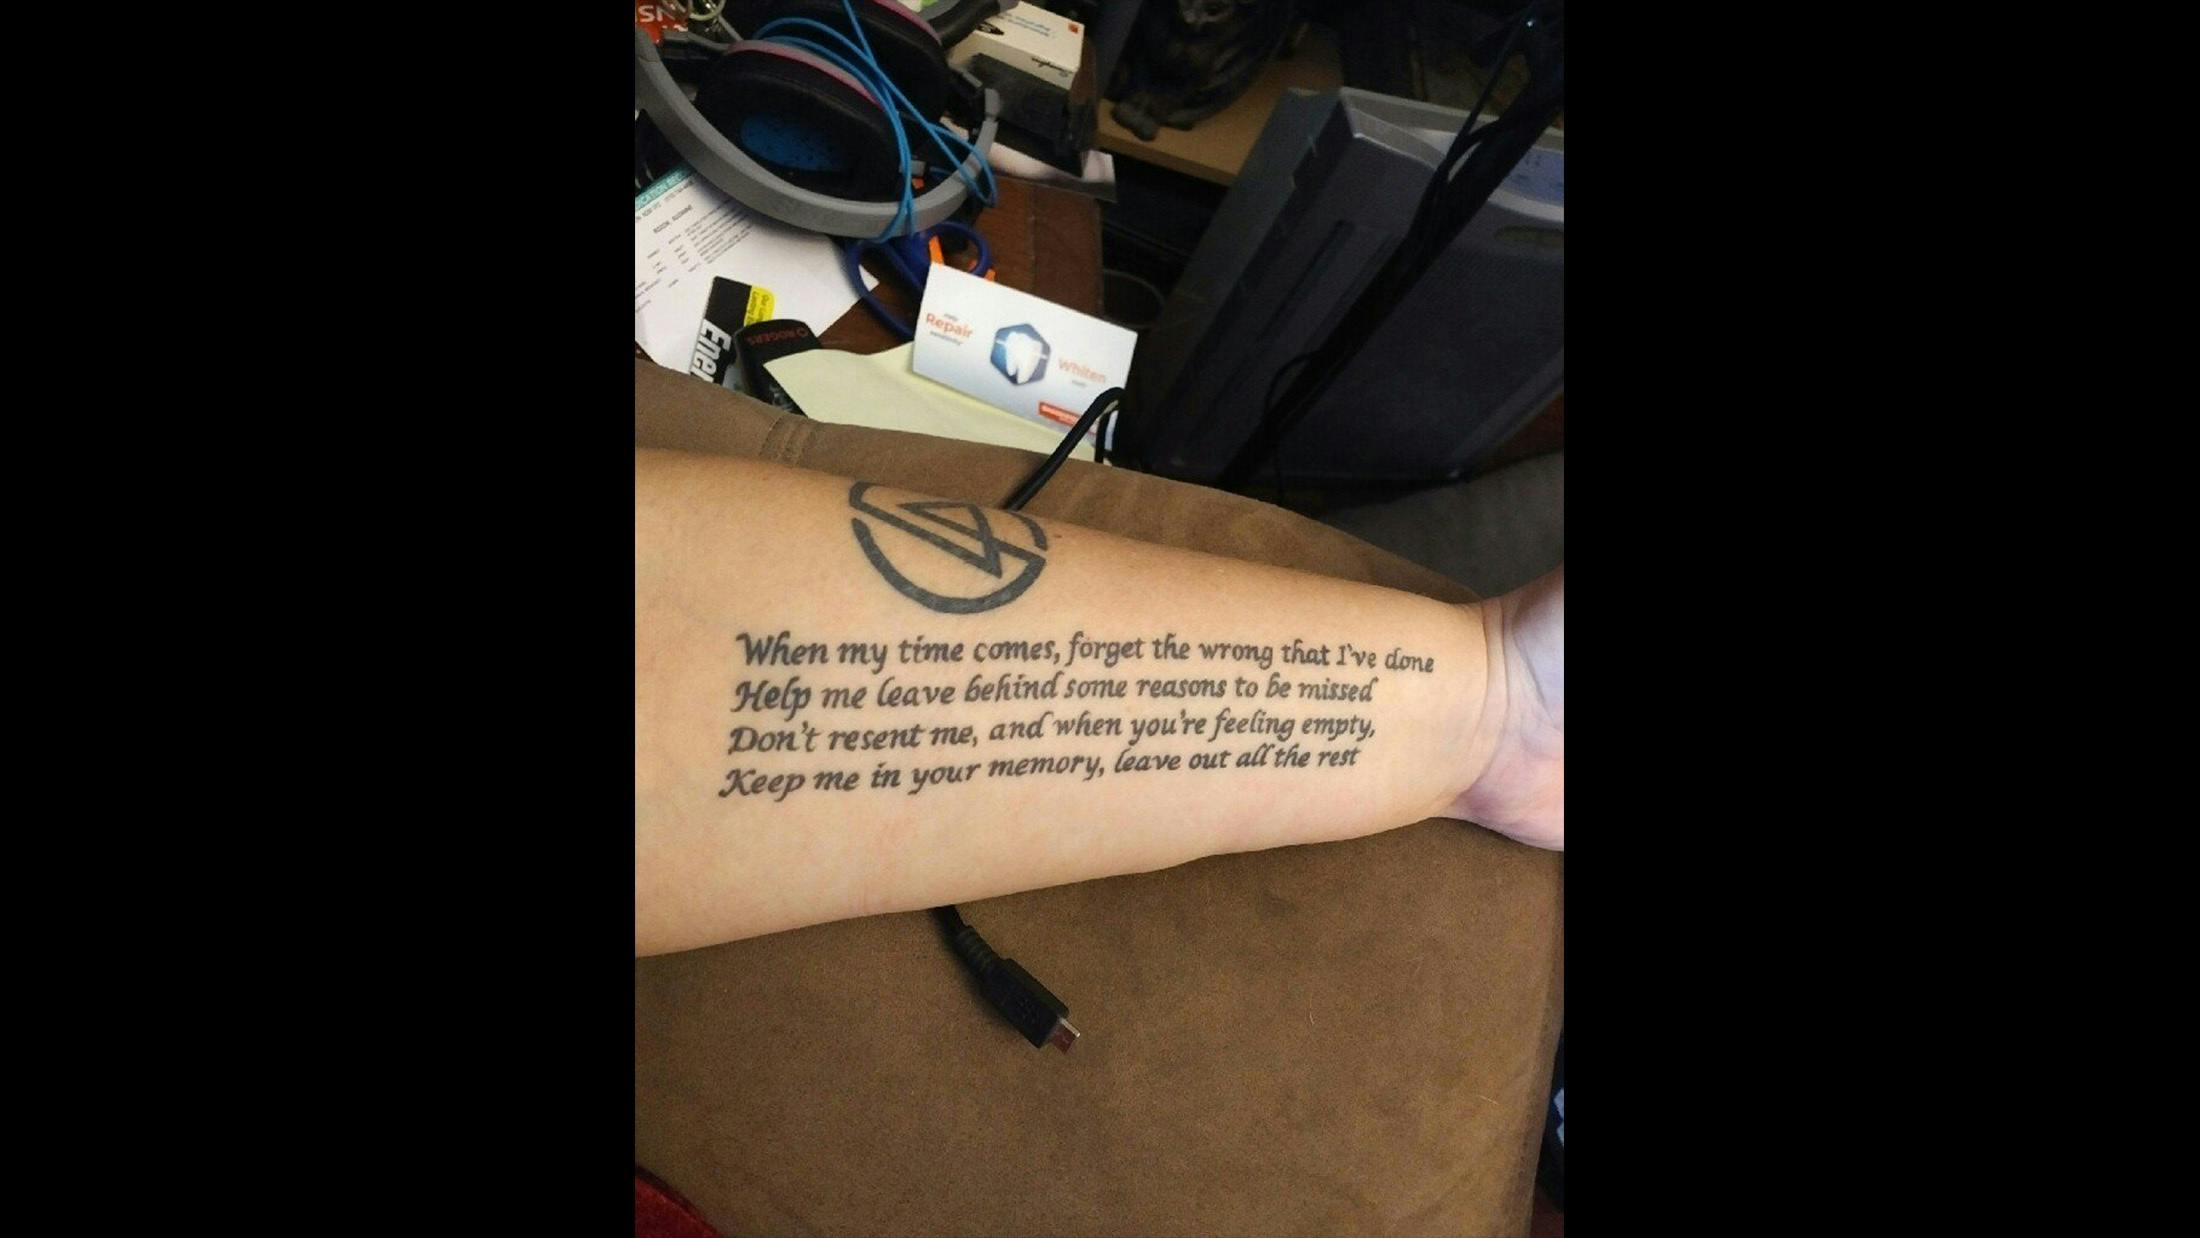 "I got this over a year ago because it made me think of my mom. Now it's even more meaningful."